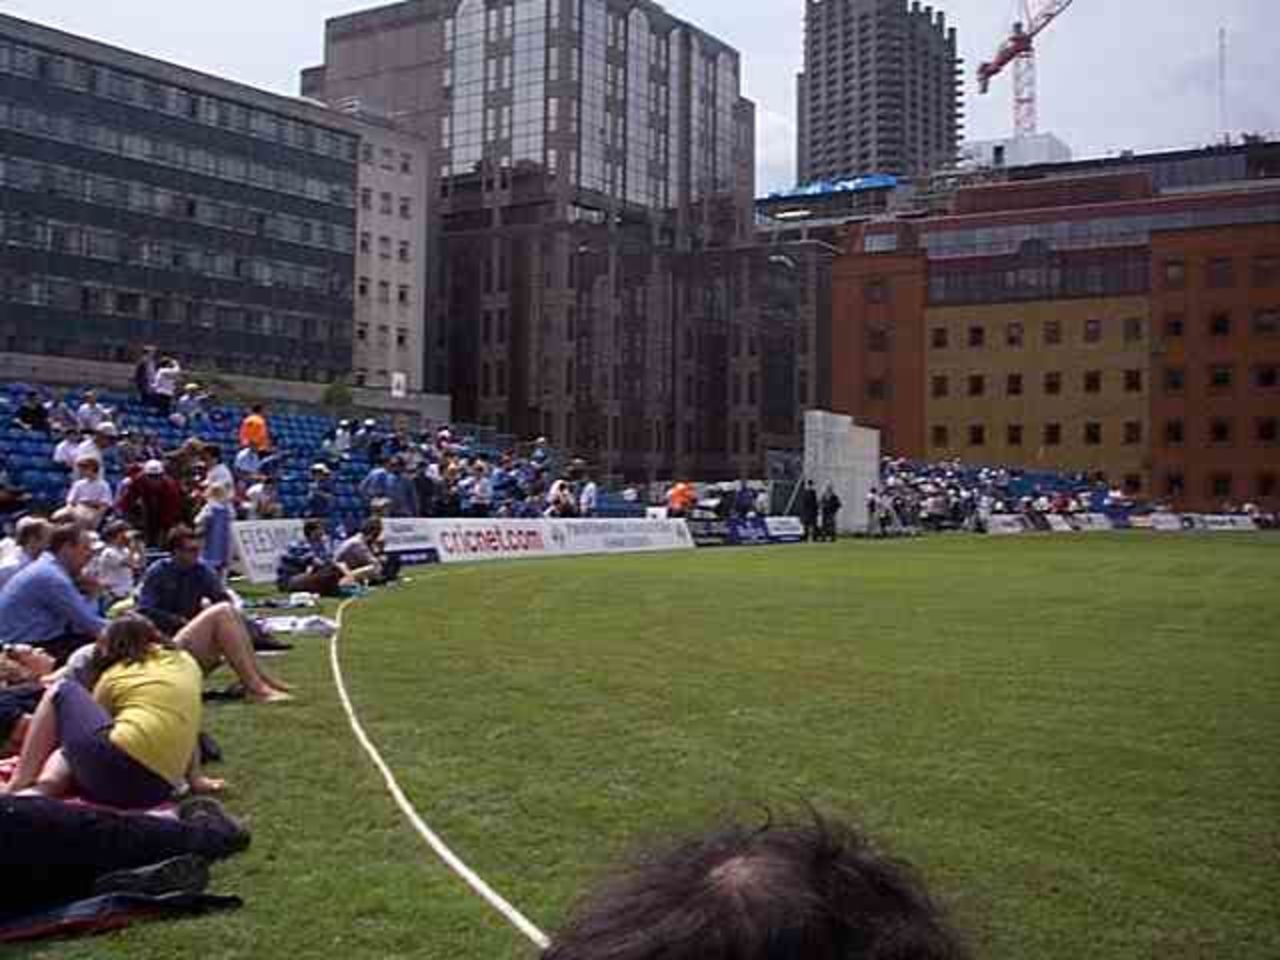 The Honourable Artillery Company ground in central London starts to fill up in anticipation of the start of the Malcolm Marshall Memorial game.